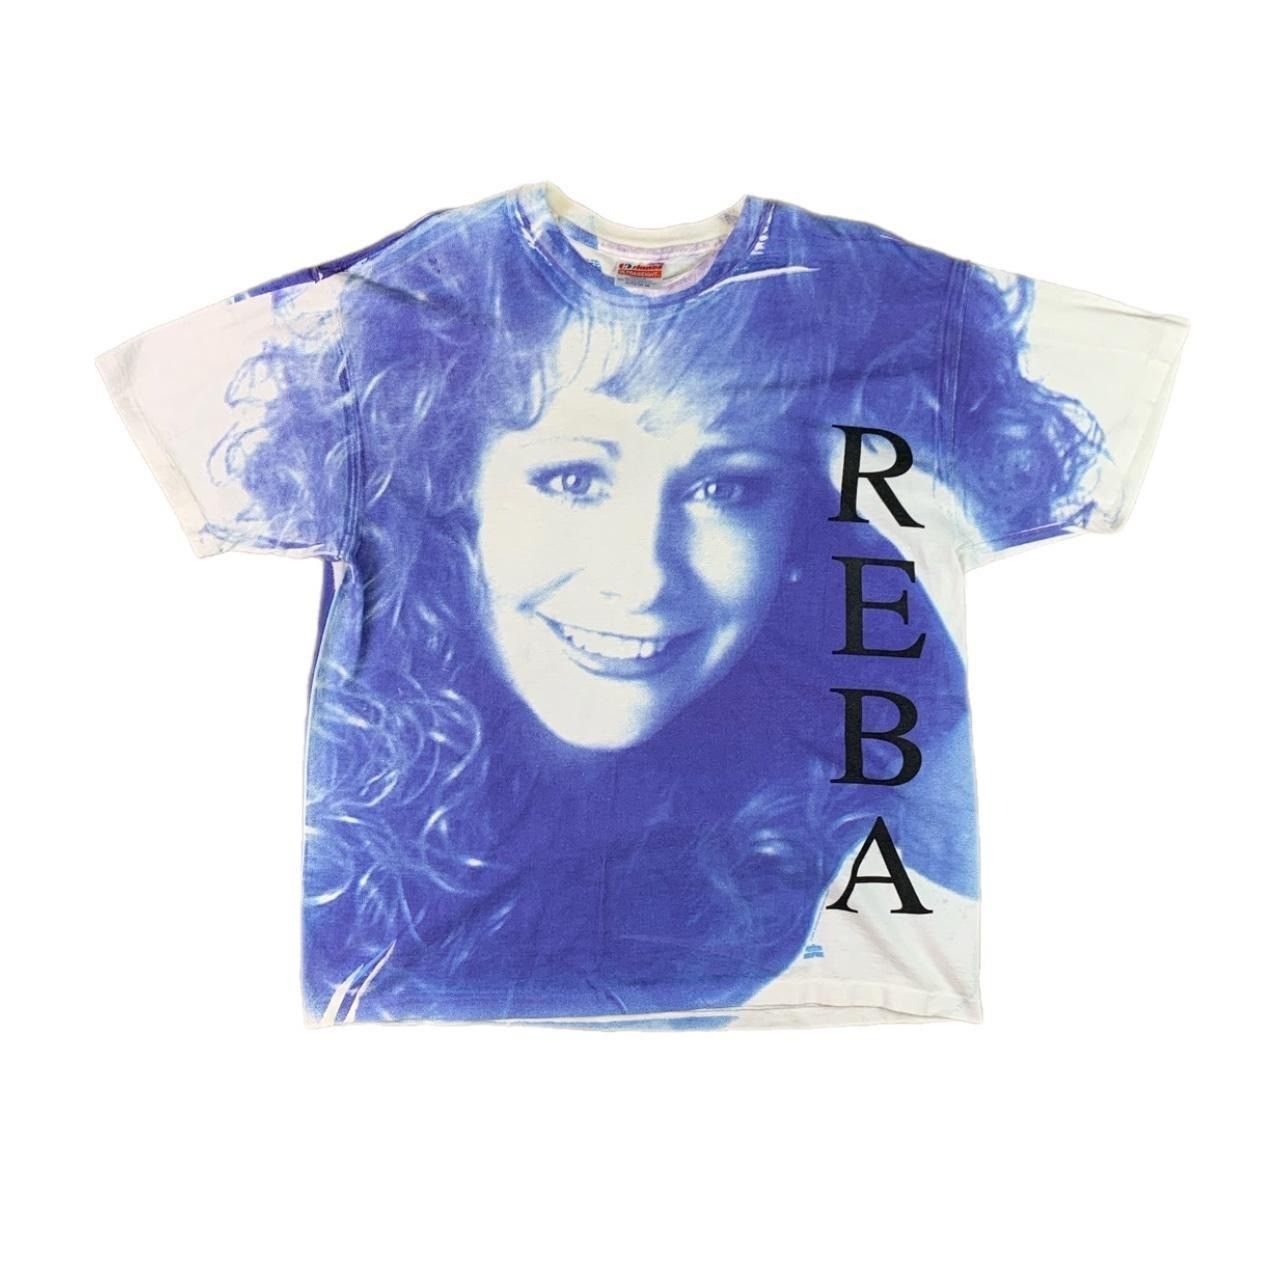 Vintage Vintage 90s Reba Country All Over Print 1992 Band T Shirt Size US XL / EU 56 / 4 - 2 Preview